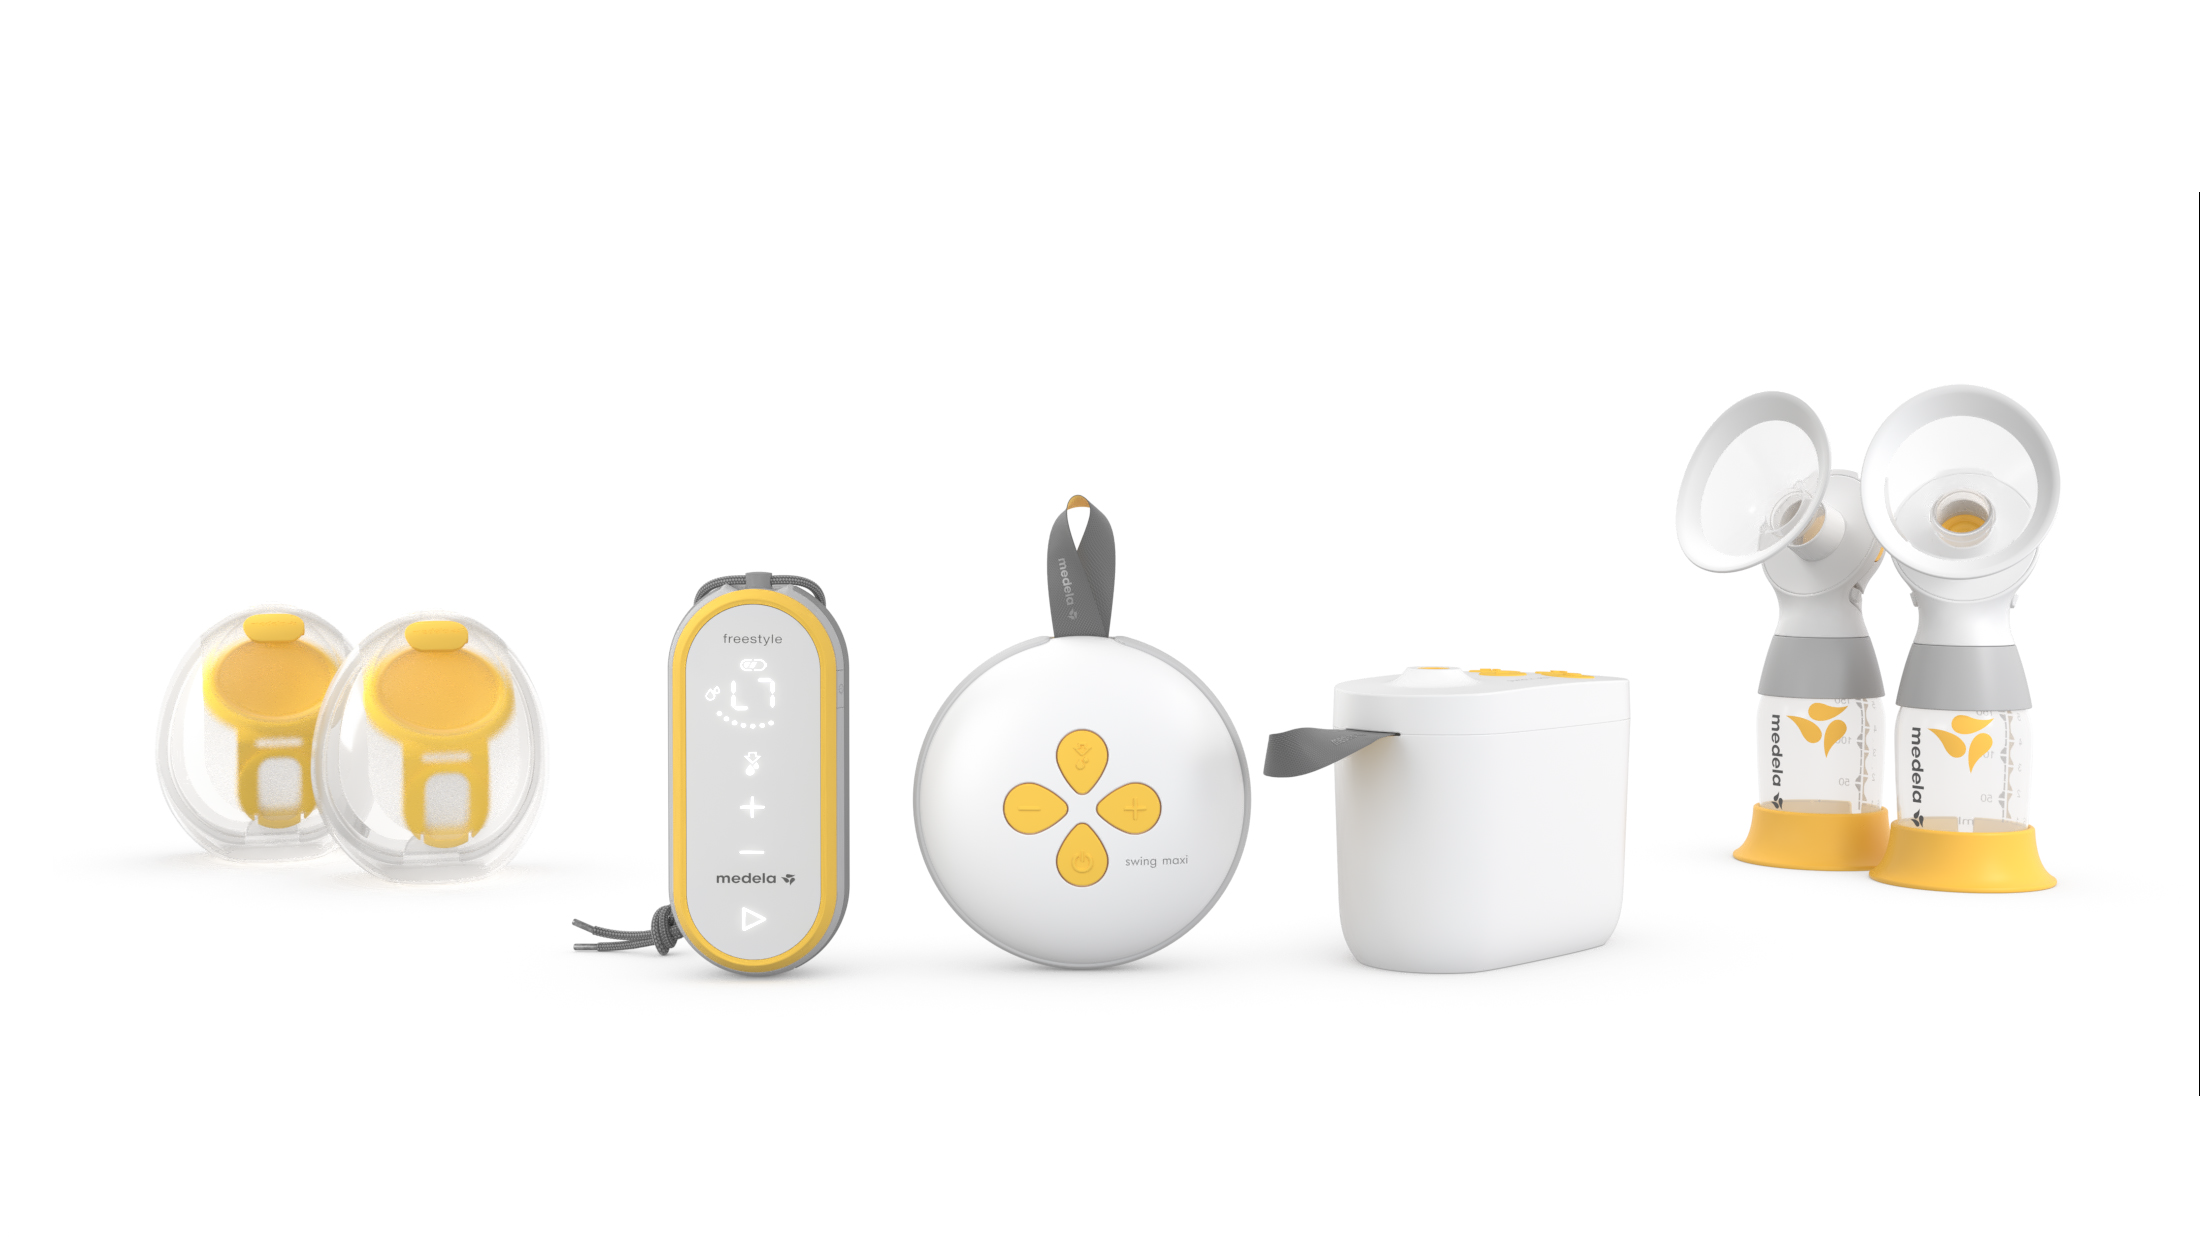 Medela's Award-Winning Wearable Collection Cups Now